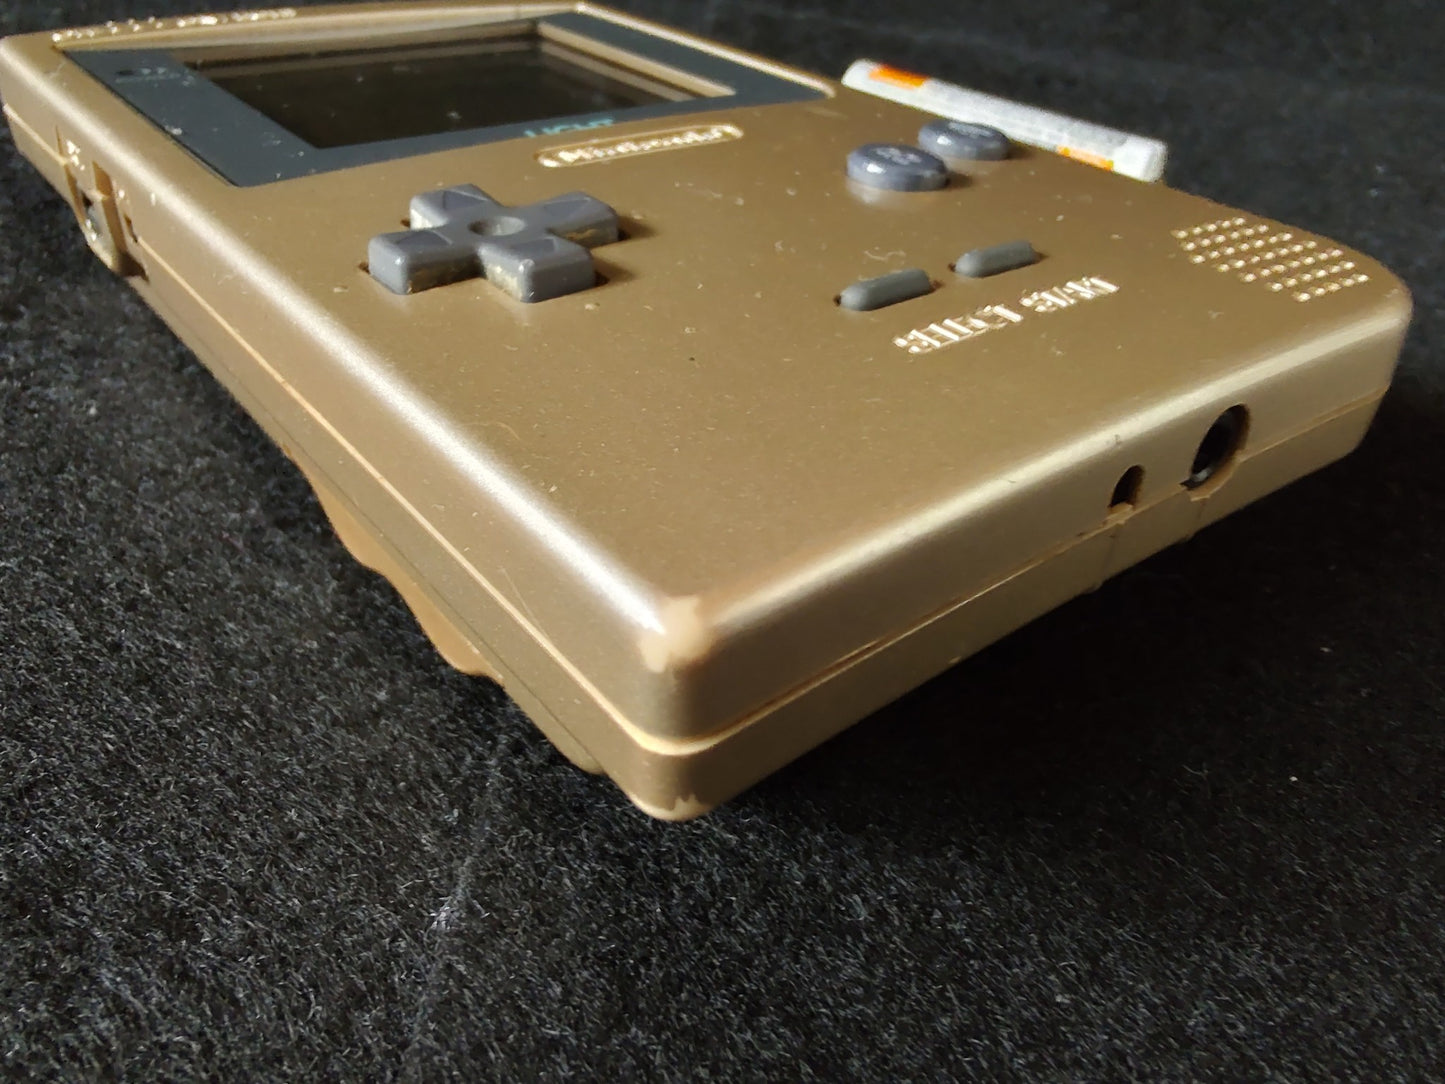 Nintendo Gameboy Light Gold color console MGB-101 and Game set/ Working-f0927-